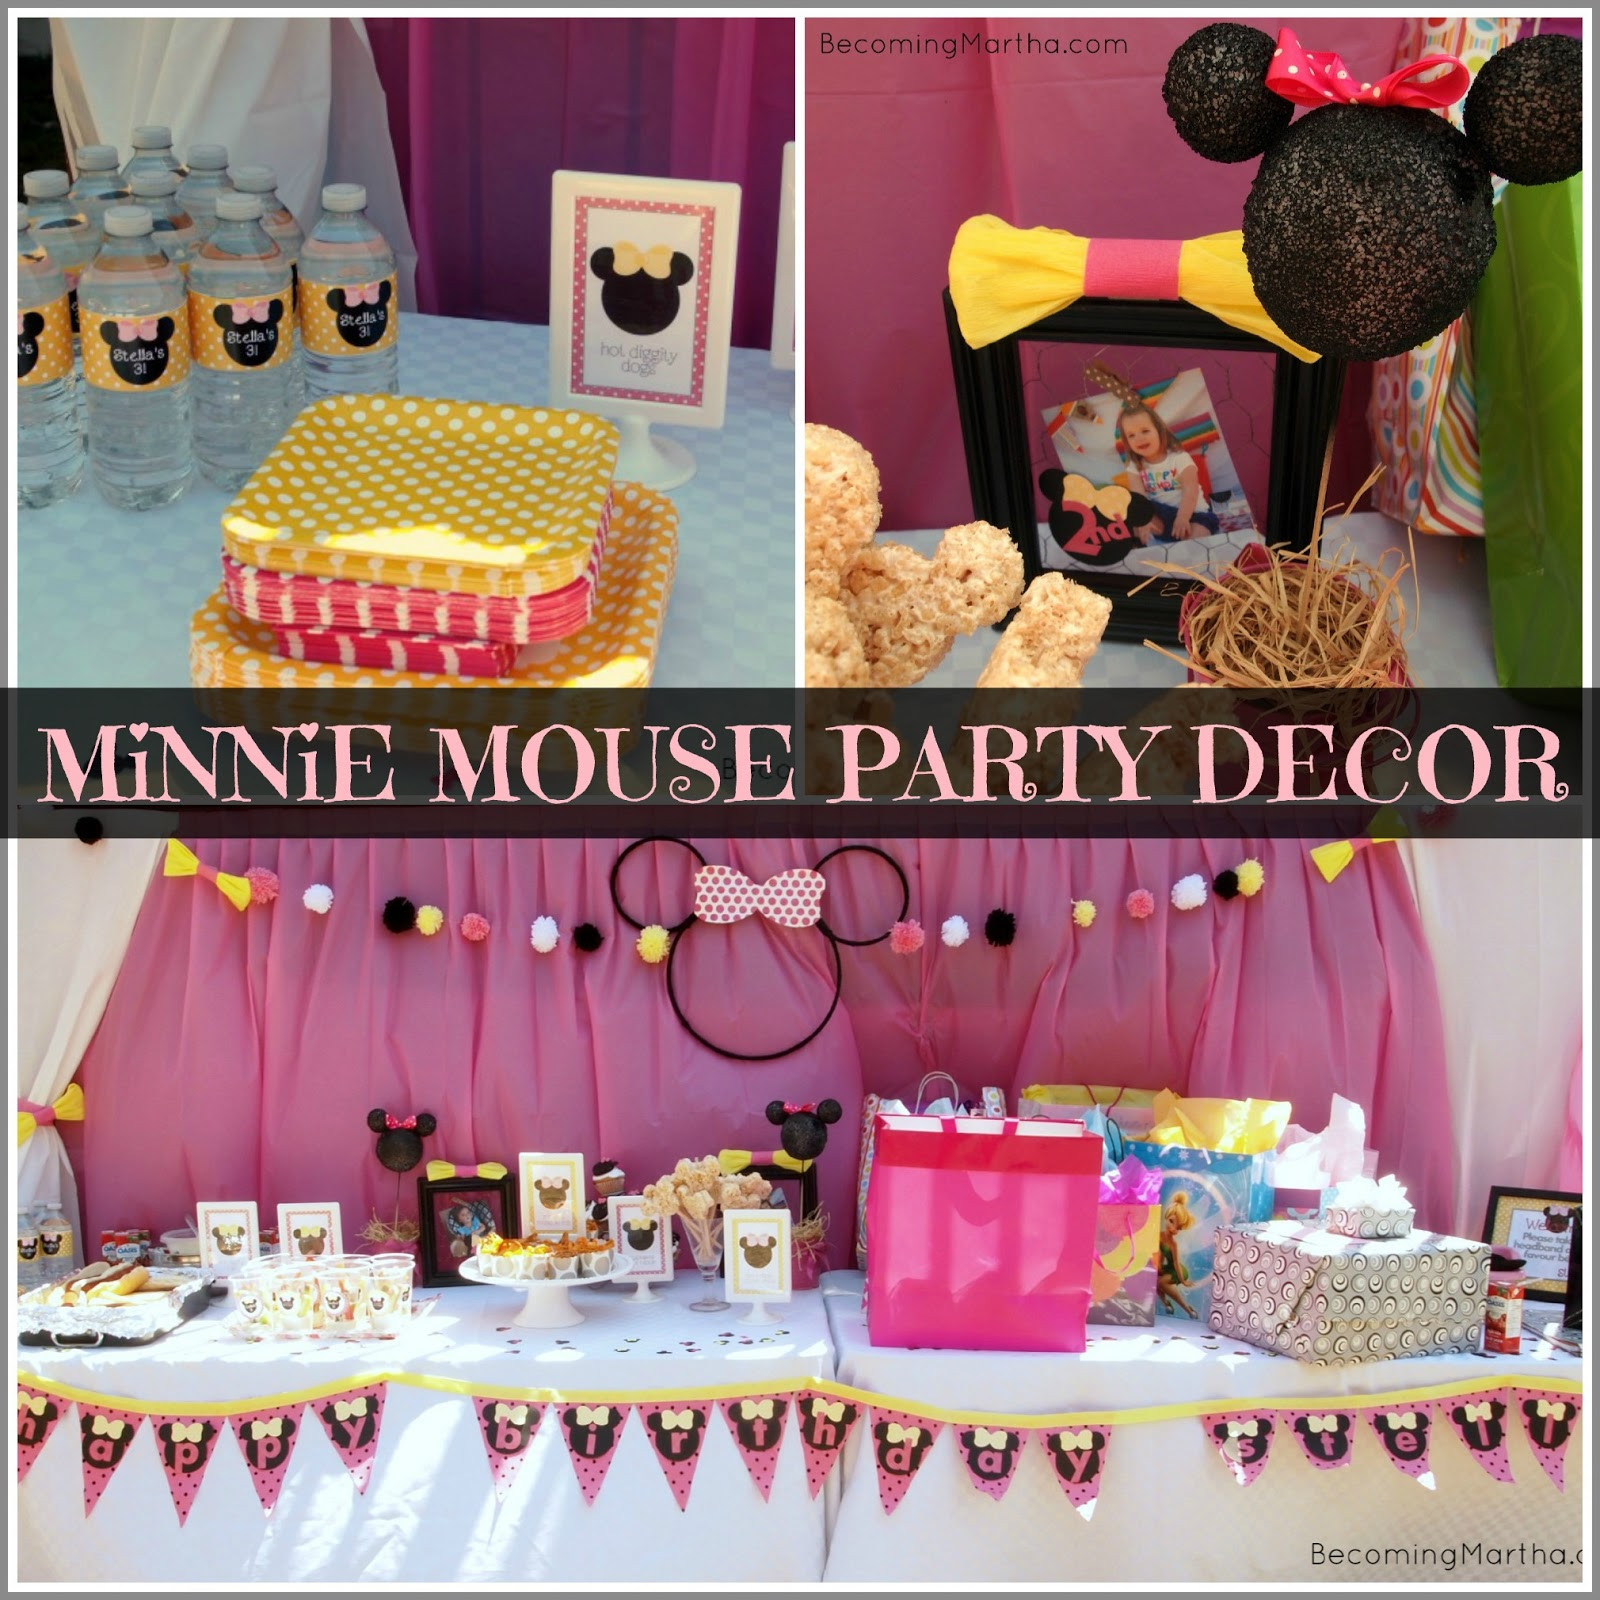 Minnie Mouse Birthday Decorations
 Minnie Mouse Party Decor The Simply Crafted Life